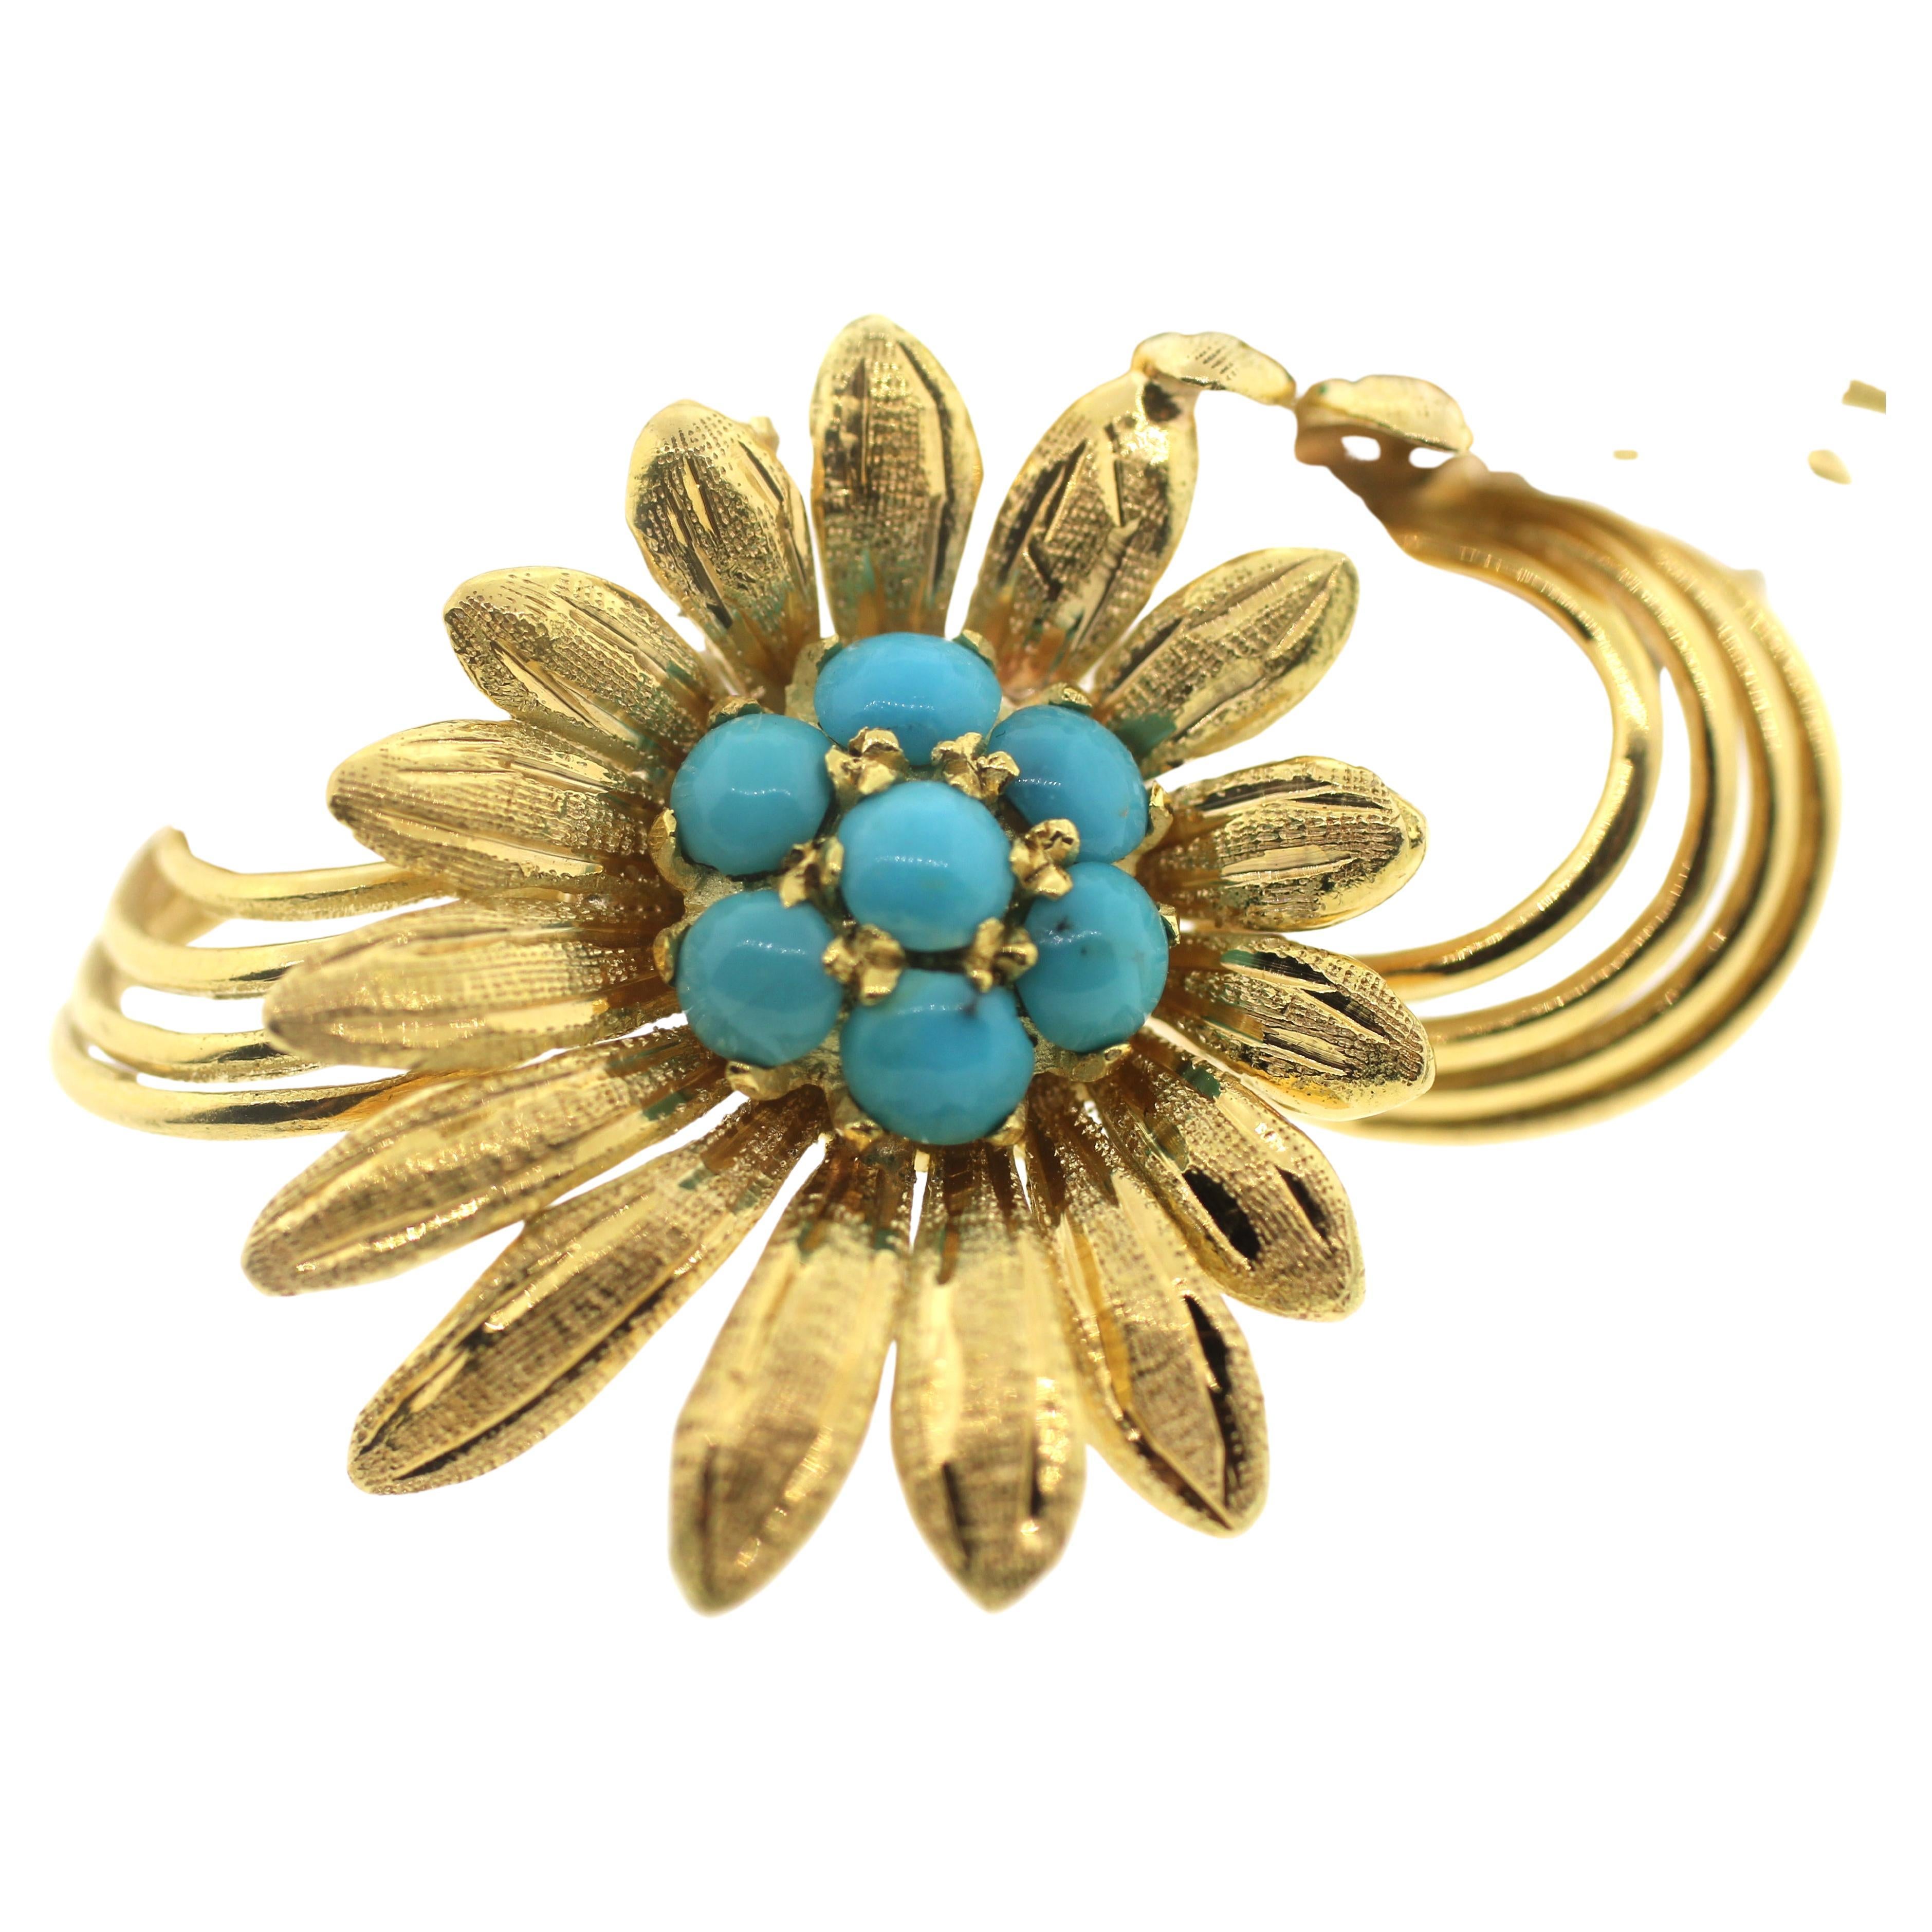 Cabochon Jewel of Ocean 18k Turquoise Estate Flower Brooch 'Convertible to Pendent' For Sale